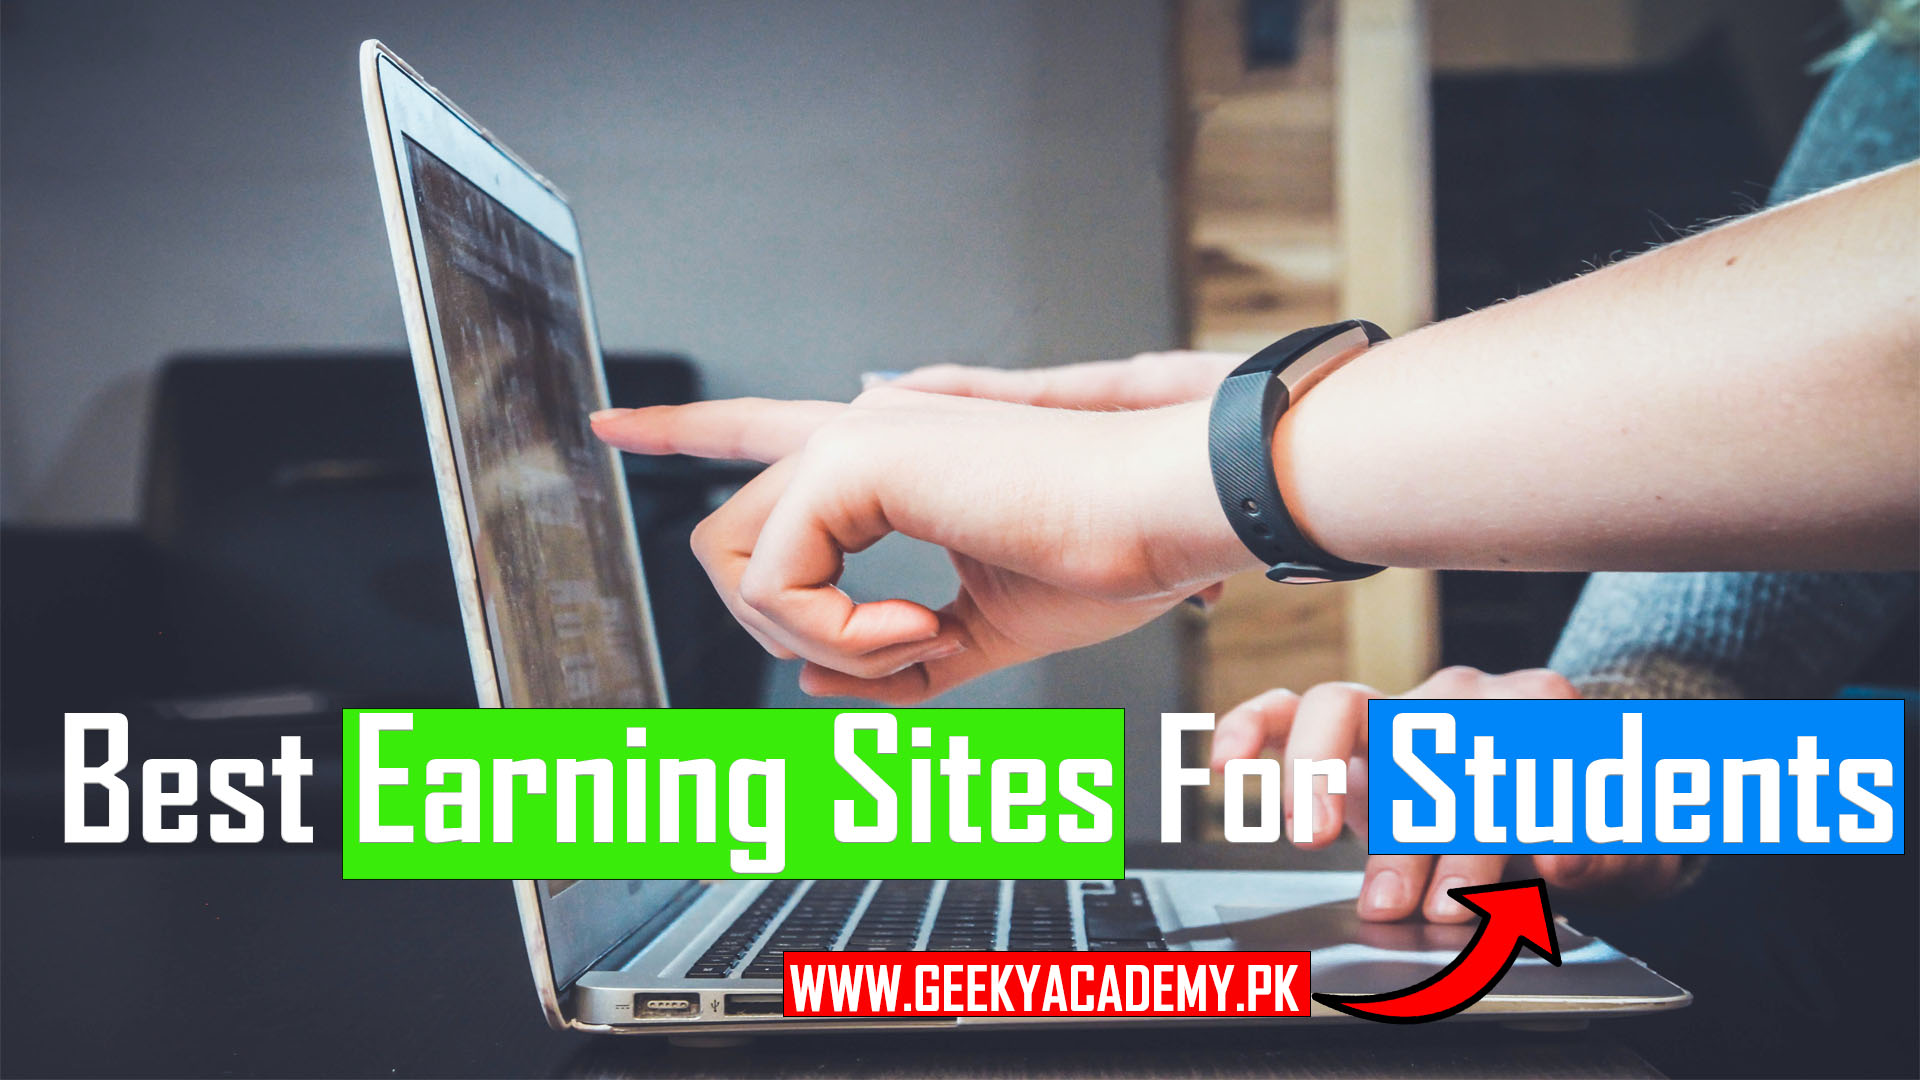 Best Earning Sites For Students